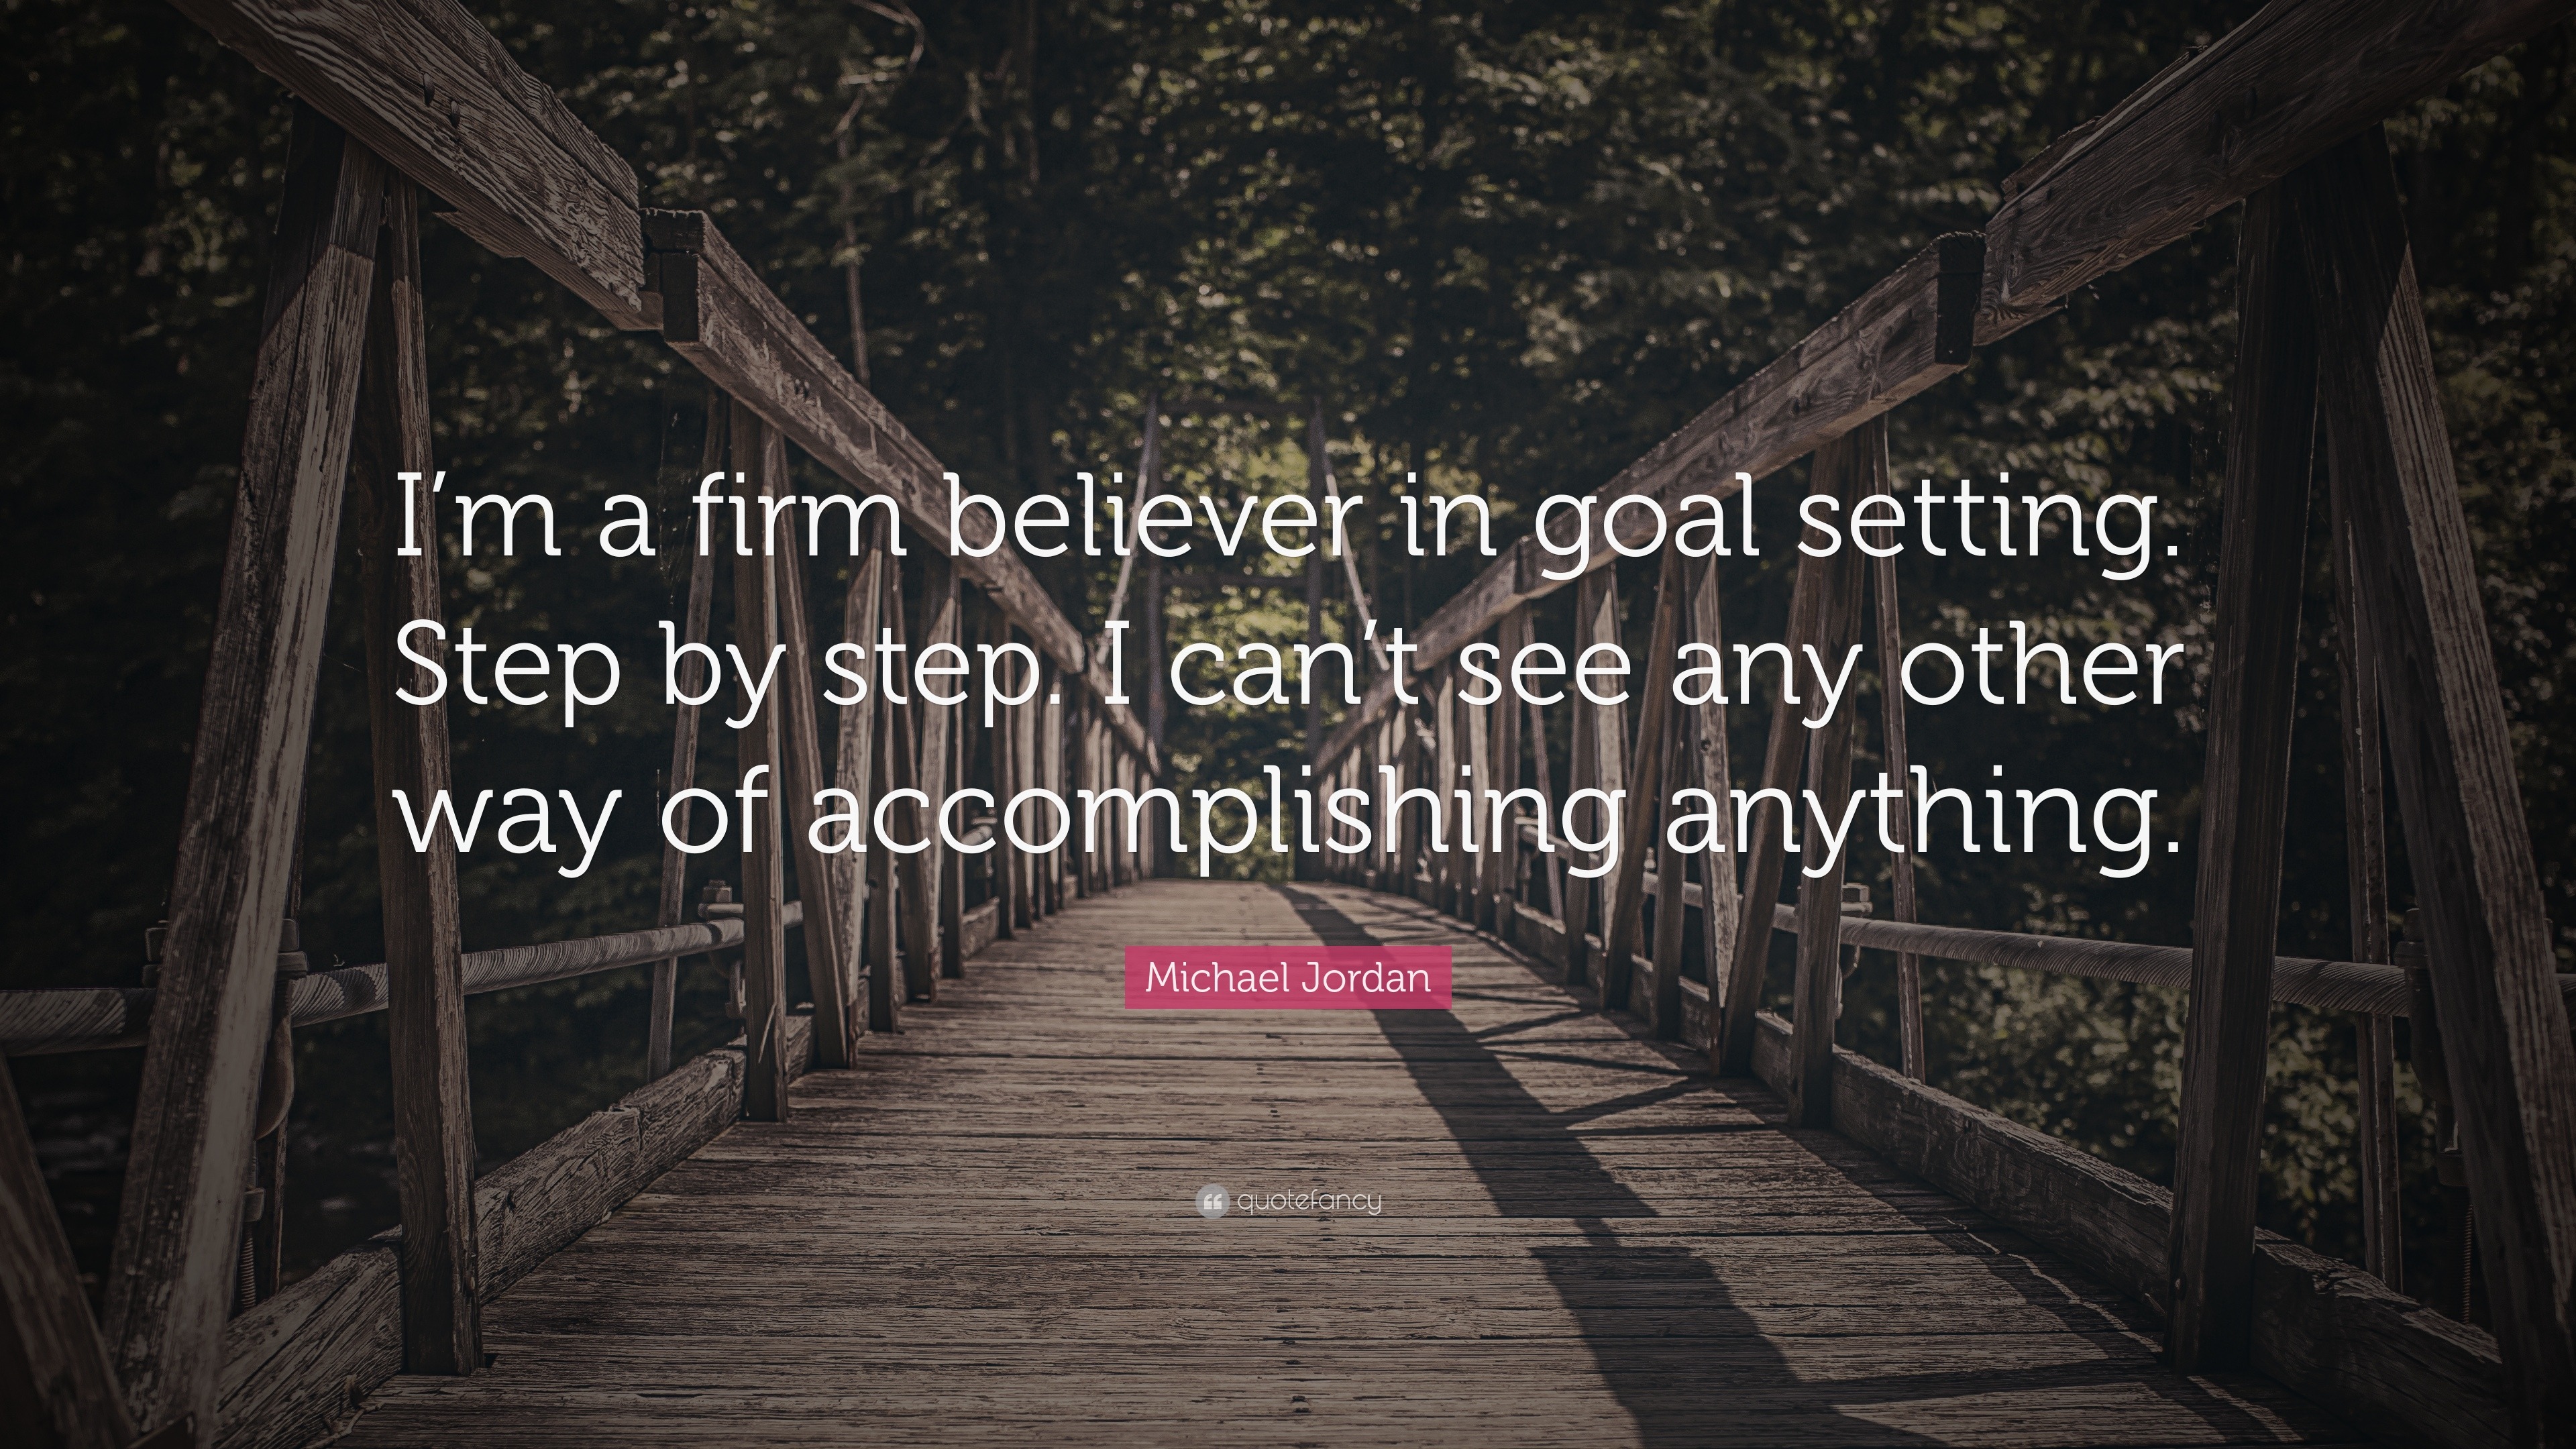 Goal Quotes “I m a firm believer in goal setting Step by